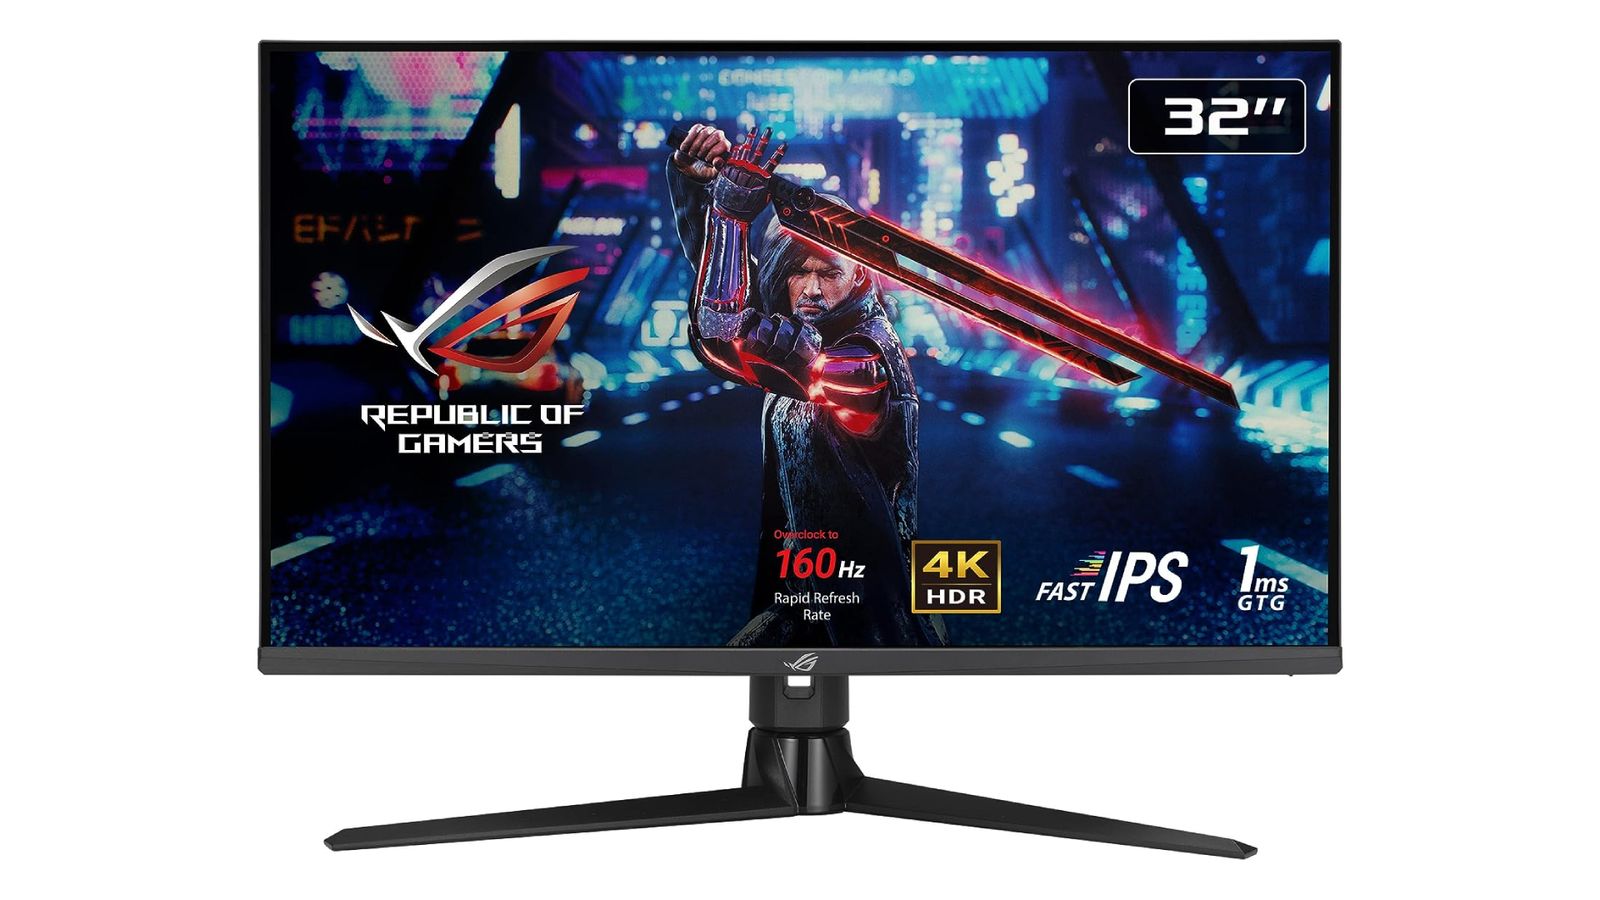 ASUS ROG Strix XG32UQ product image of a black monitor with a video game character holding a red flaming sword on the display.